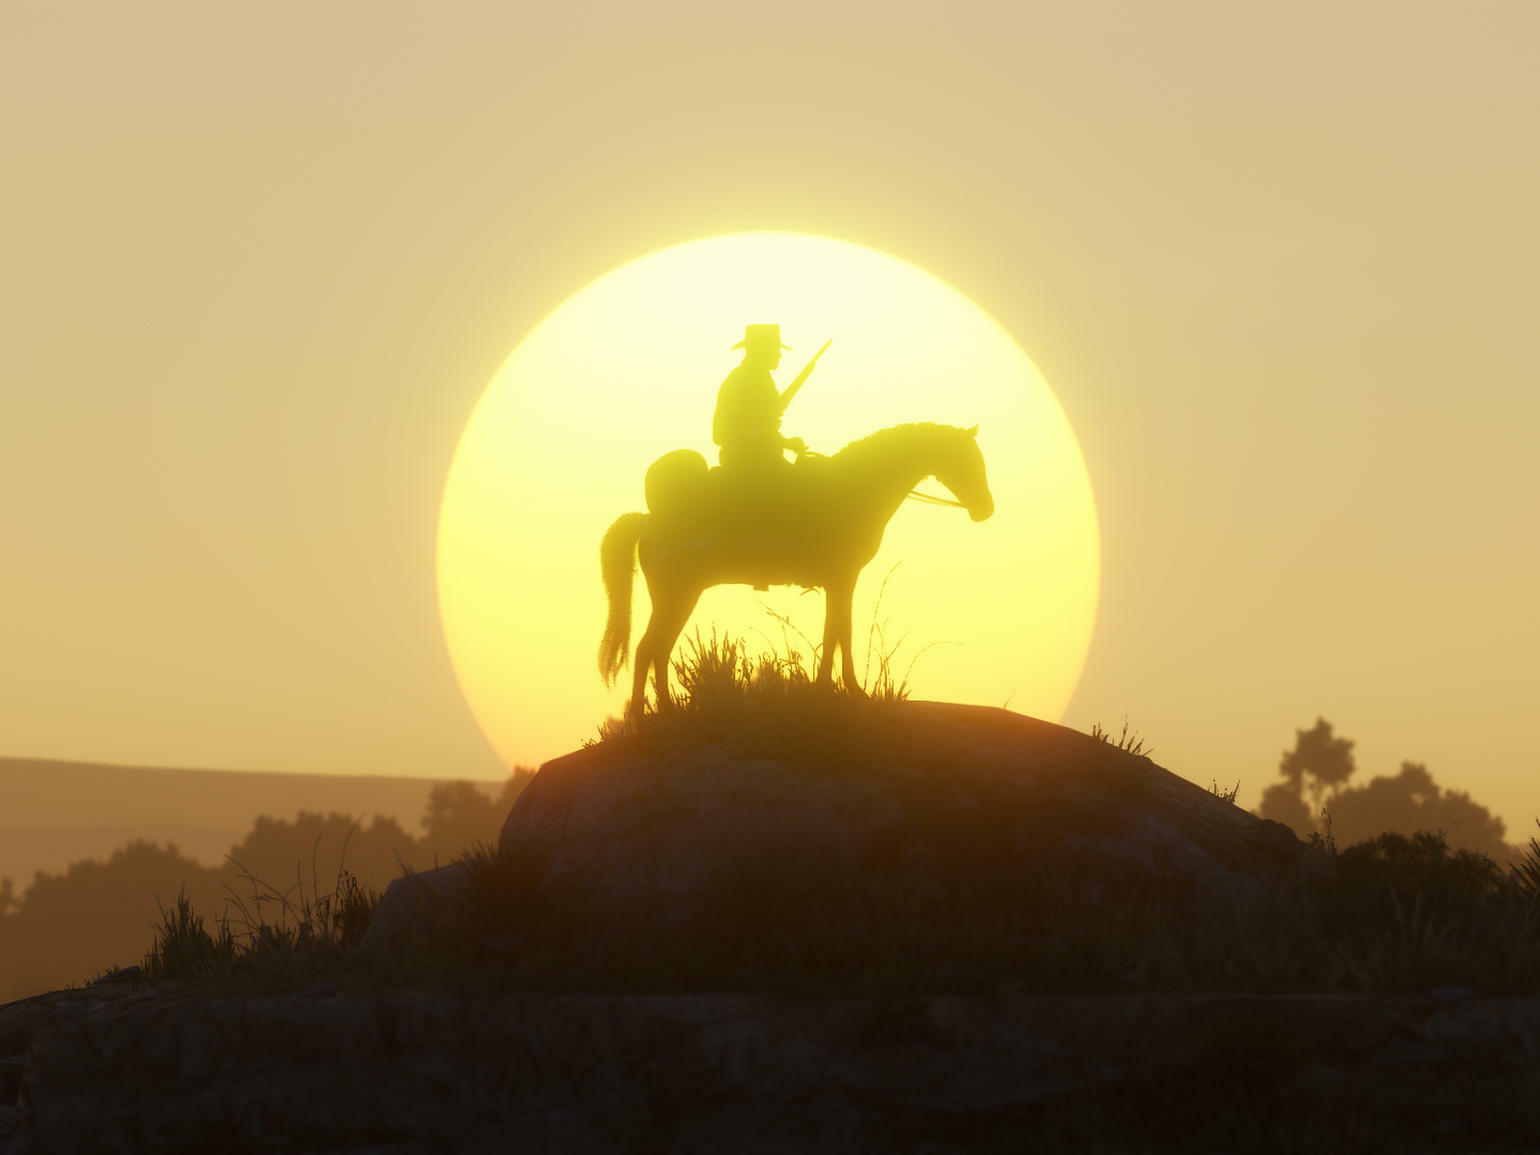 Red Dead Redemption 2 (£24.99) 